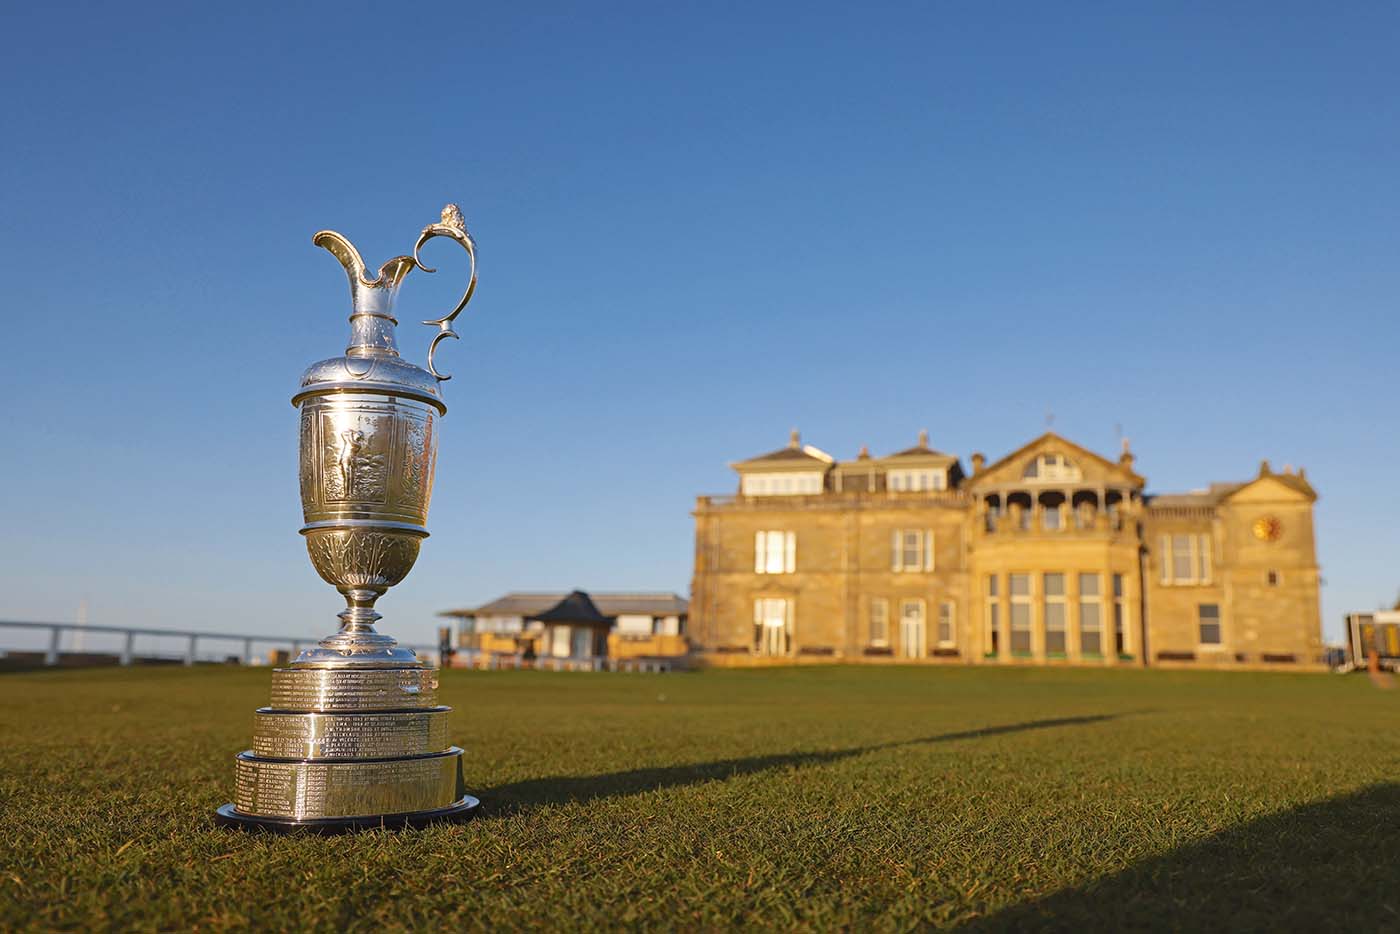 ST ANDREWS, SCOTLAND - APRIL 27: The Claret Jug sits on the first tee of The Old Course in front of the R&A Clubhouse at St Andrews on April 27, 2022 in St Andrews, Scotland. The 150th Open Championship will take place on The Old Course at St Andrews between the 14th and 17th July. (Photo by Richard Heathcote/R&A/R&A via Getty Images)